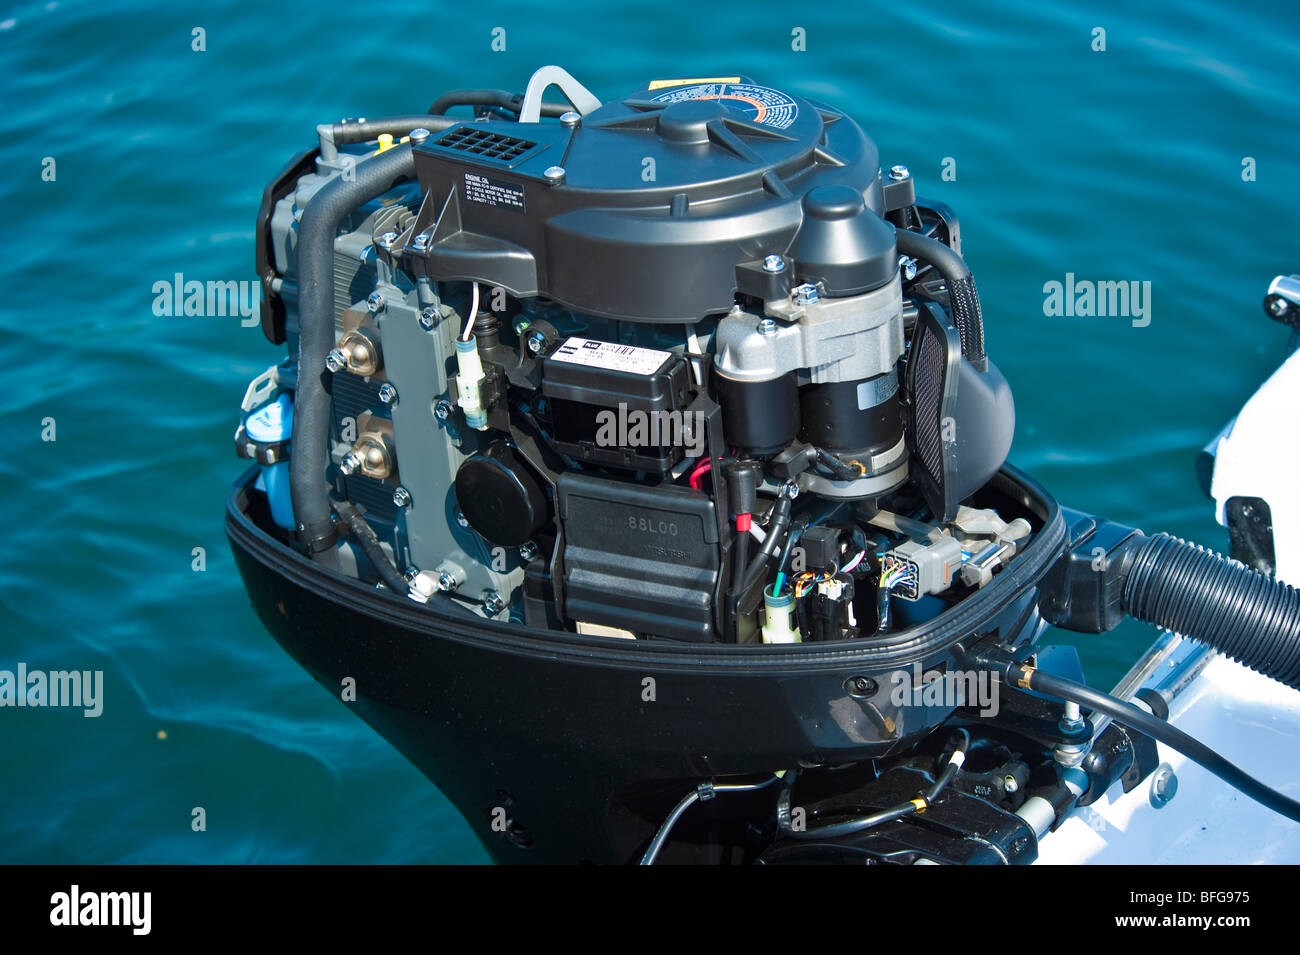 New 2009 model of Suzuki DF 60 outboard engine without cover on power boat transom Stock Photo